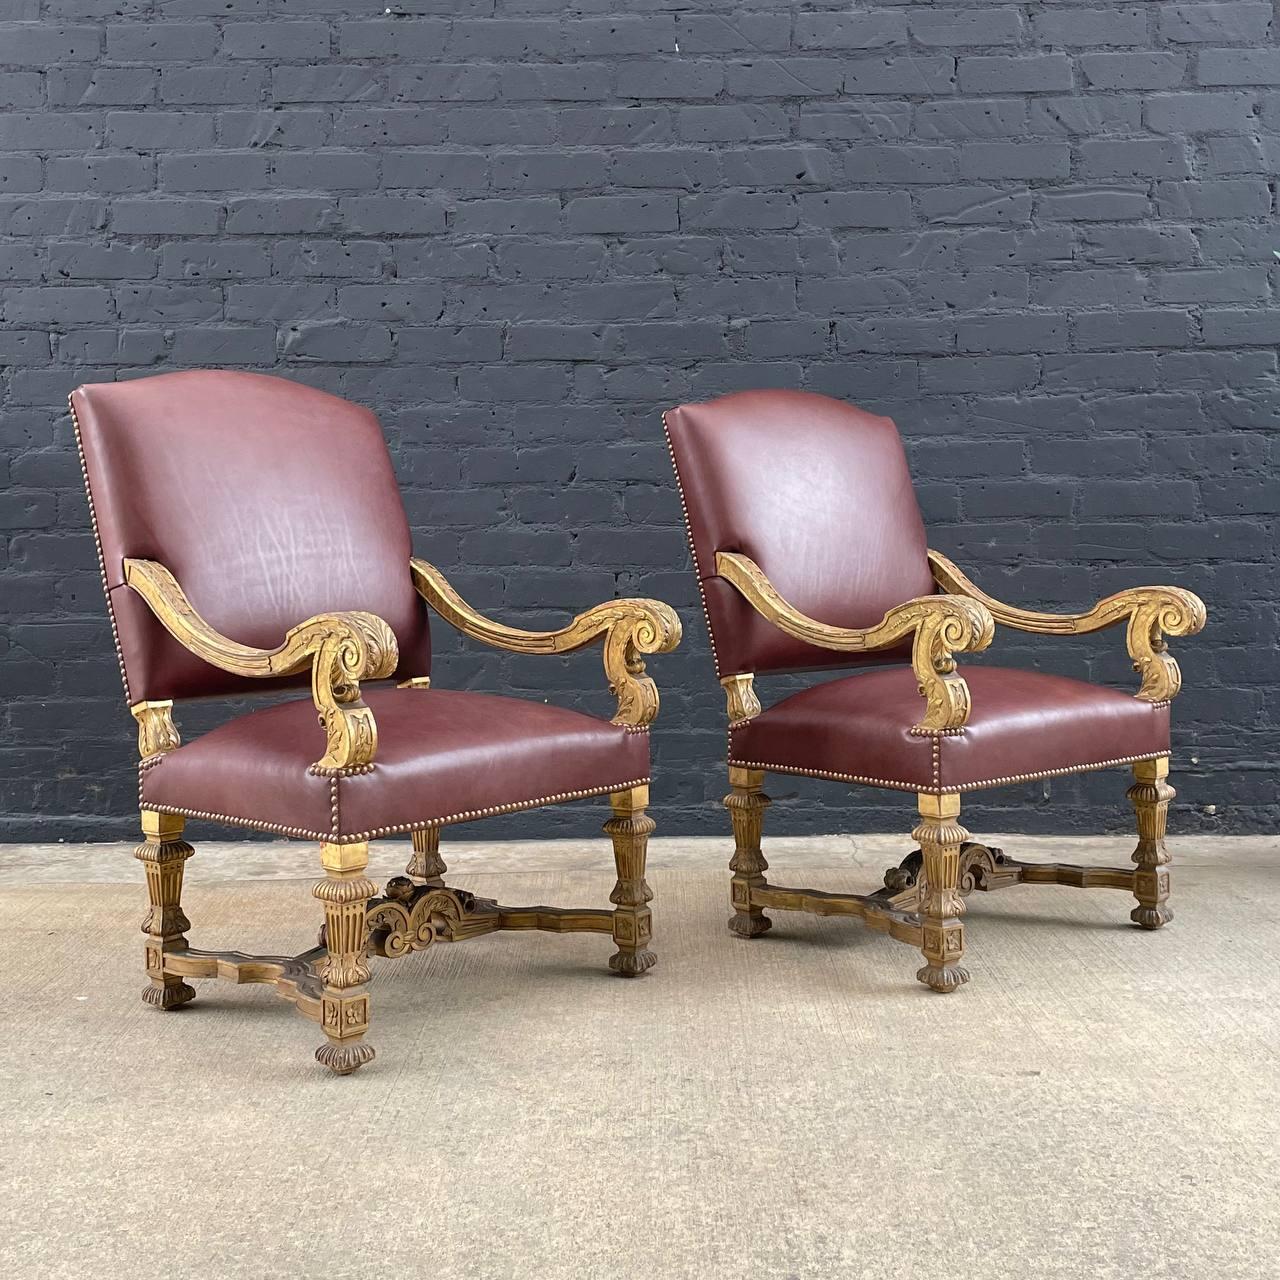 Antique French Louis XVI Gold-Leaf Gilded Carved Wood & Cognac Leather Arm Chairs
Designer: Unknwon
Country: United States
Manufacturer: Unknown
Materials: Gold-Leaf Gilded Wood, Italian Cognac Leather
Style: French Louis XVI
Year: